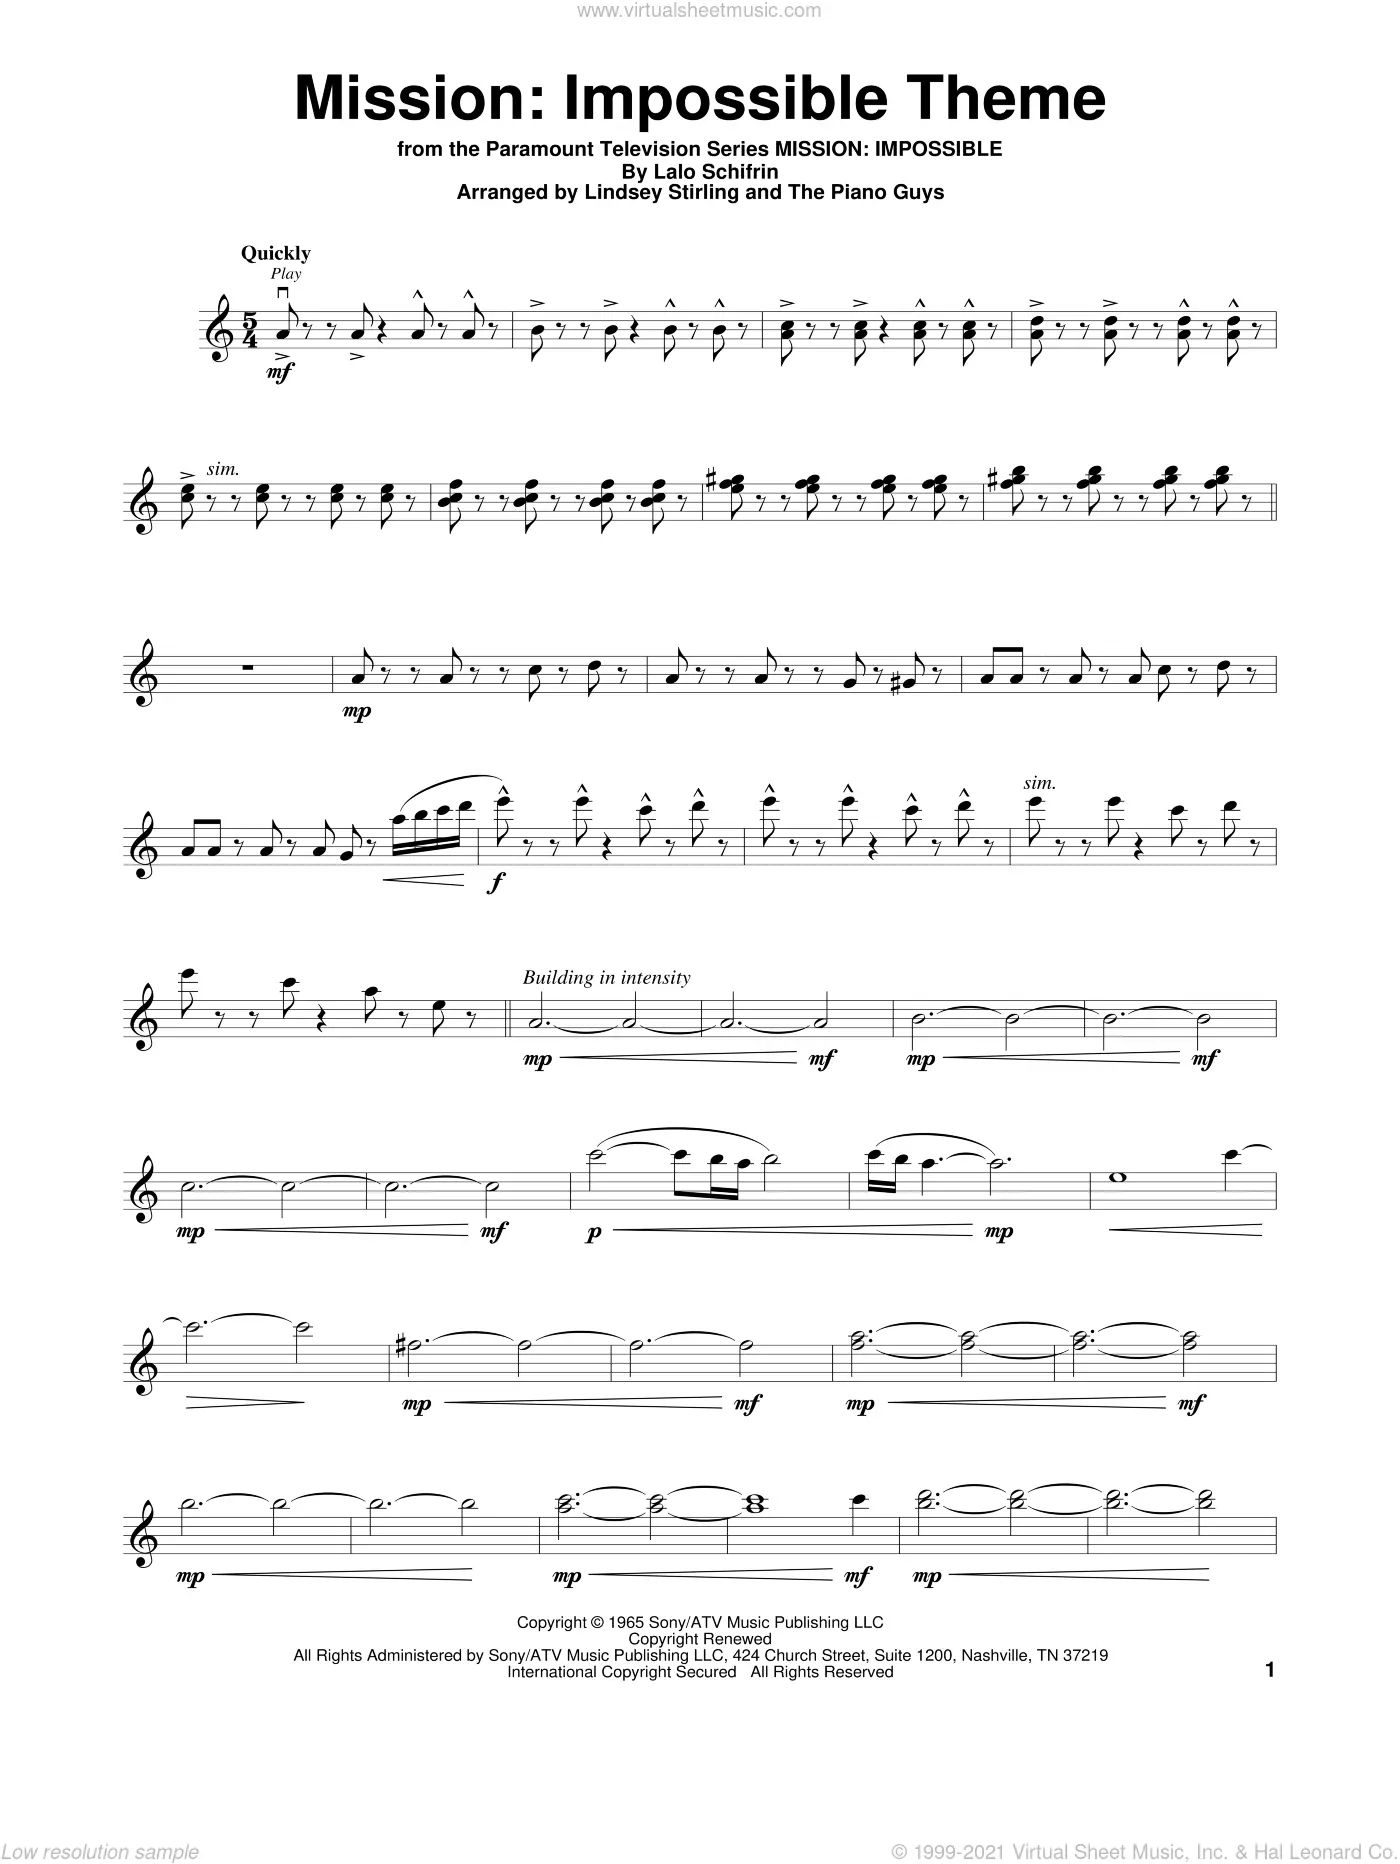 mission impossible violin notes - What key is Mission Impossible in